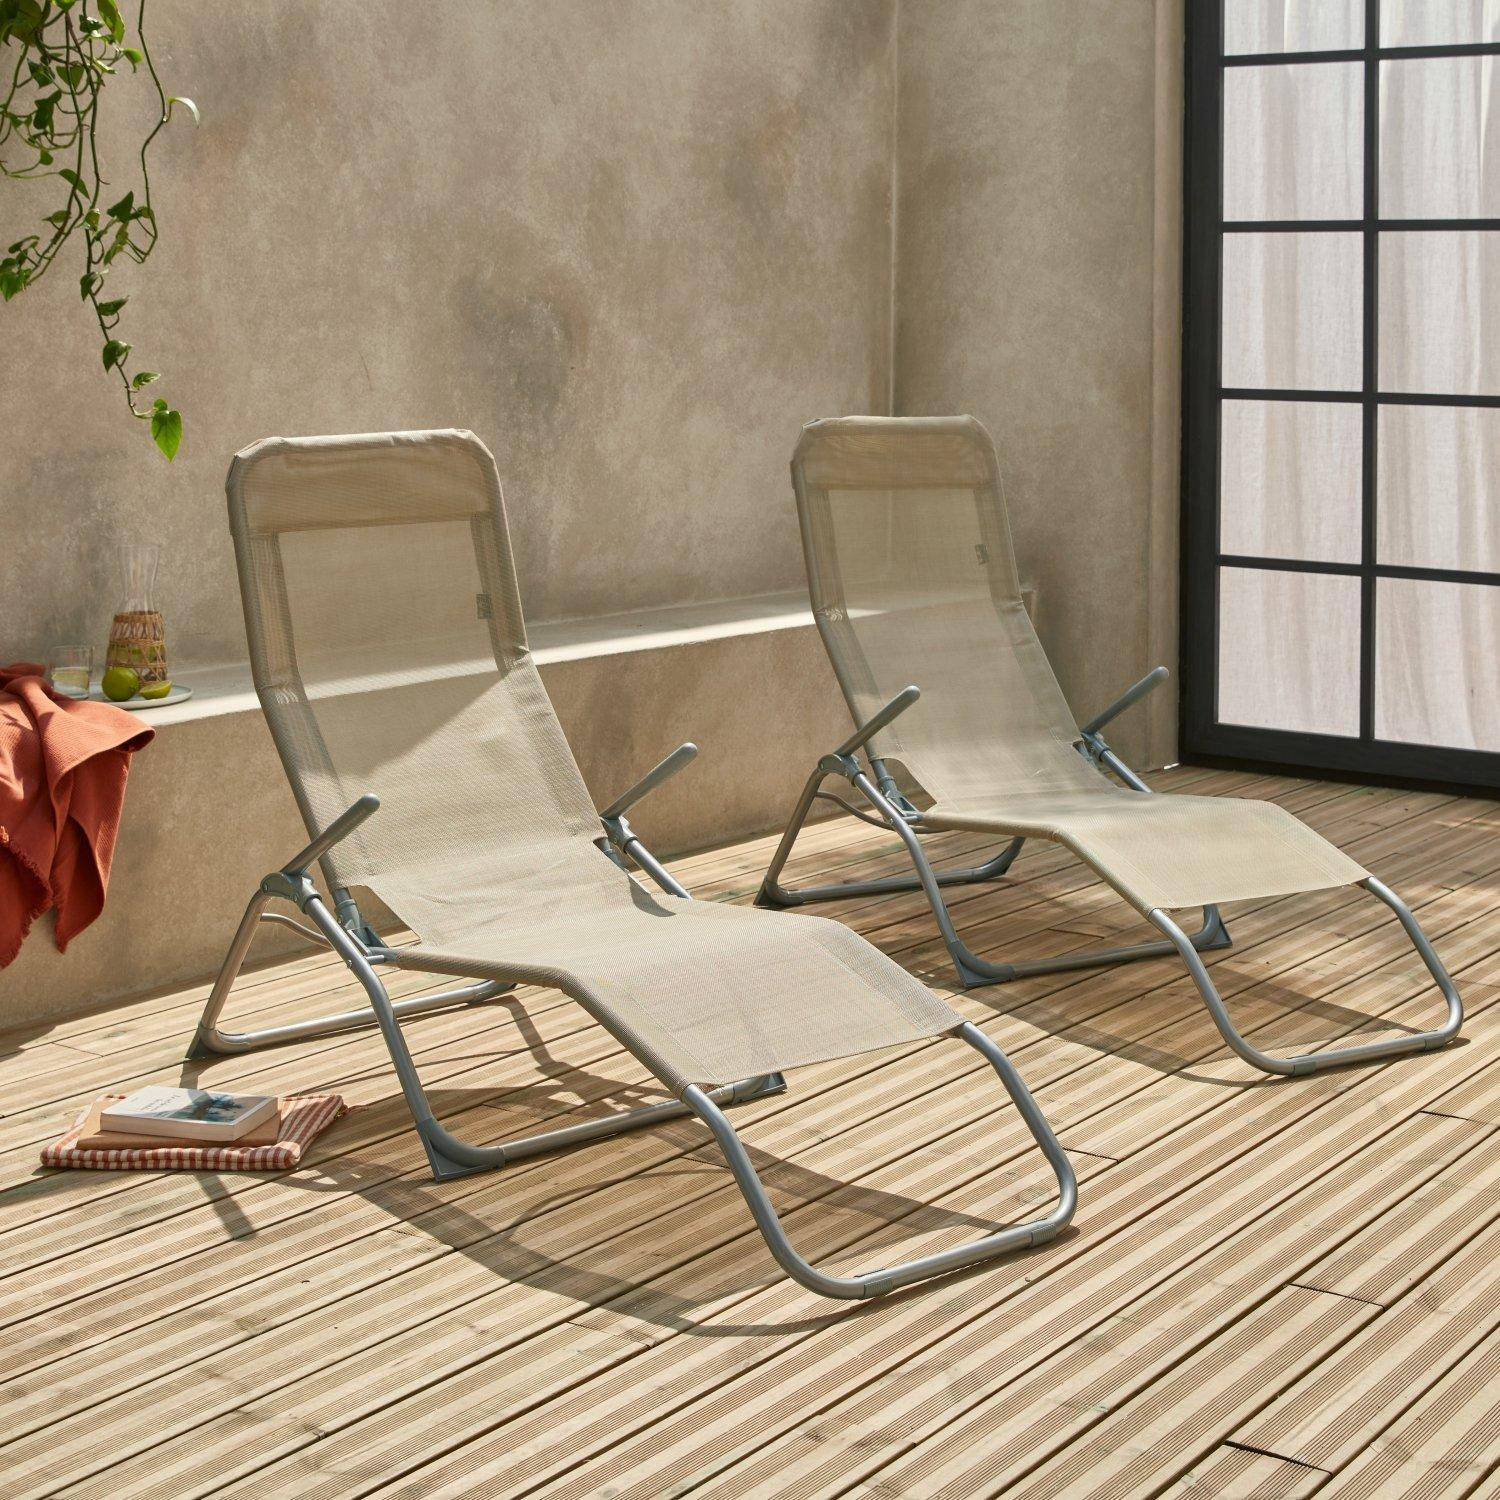 Pair Of Textilene Sun Loungers 2 Reclining Positions - image 1